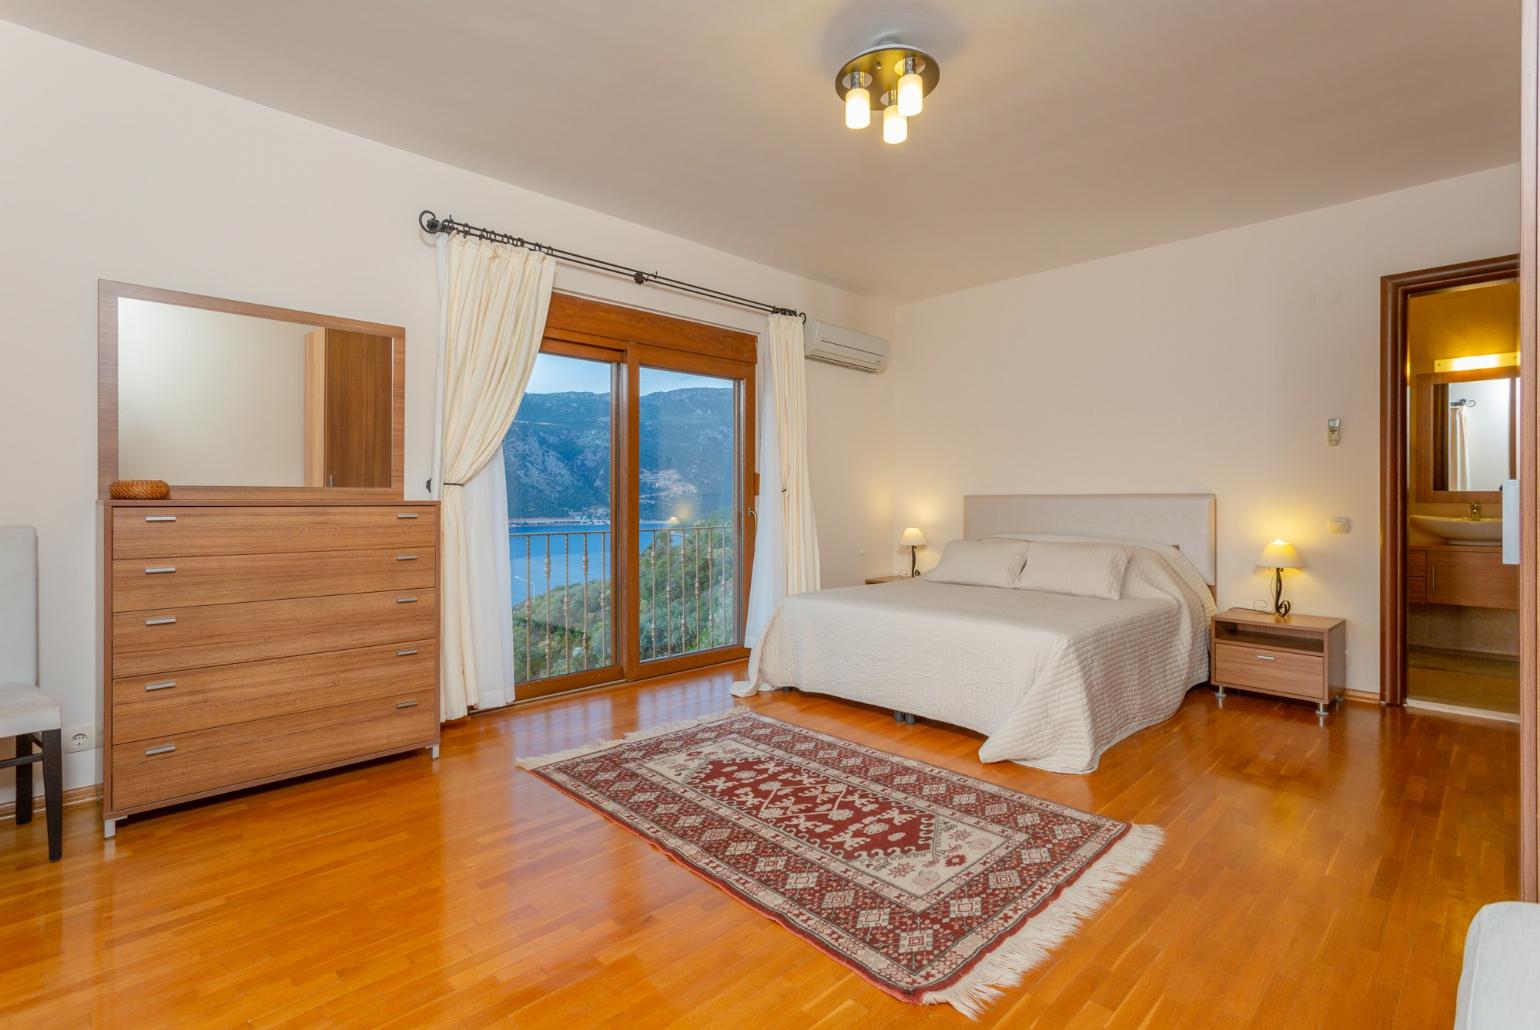 Double bedroom with en suite bathroom, A/C, and panoramic sea views